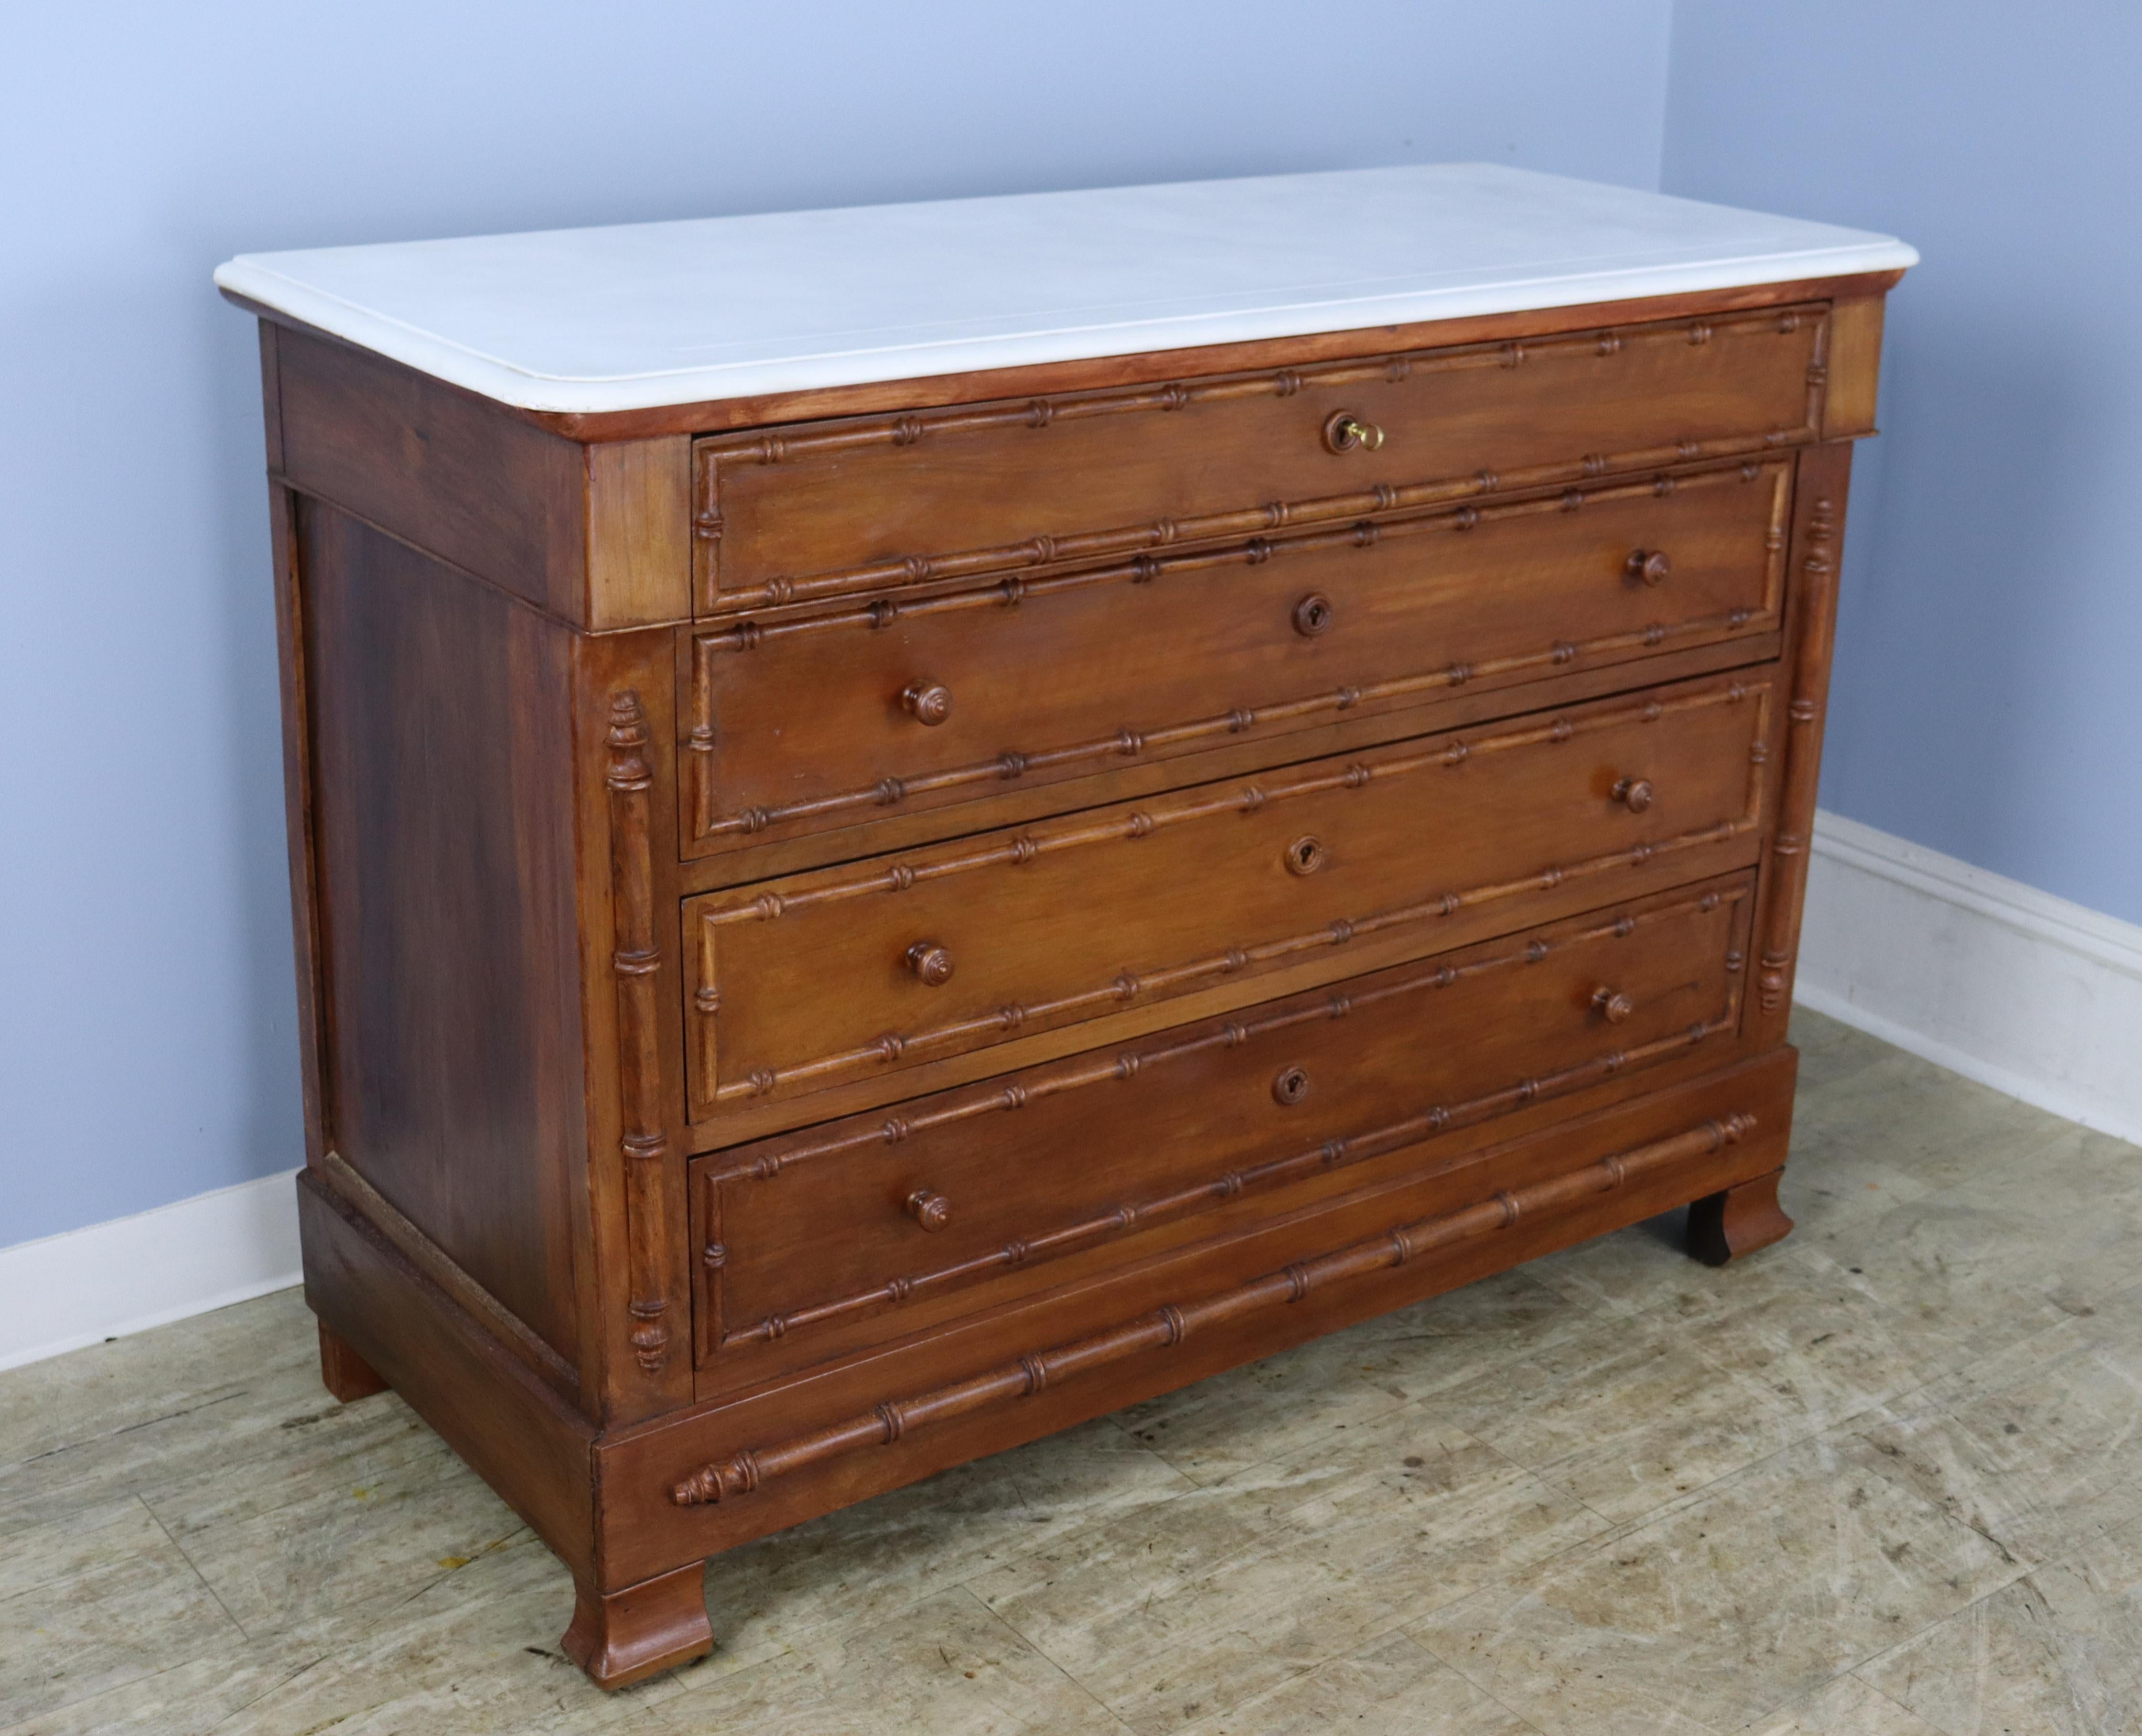 A charming chest of drawers with faux bamboo columns and mouldings. Four roomy drawers. The marble which is original is in good antique condition. 